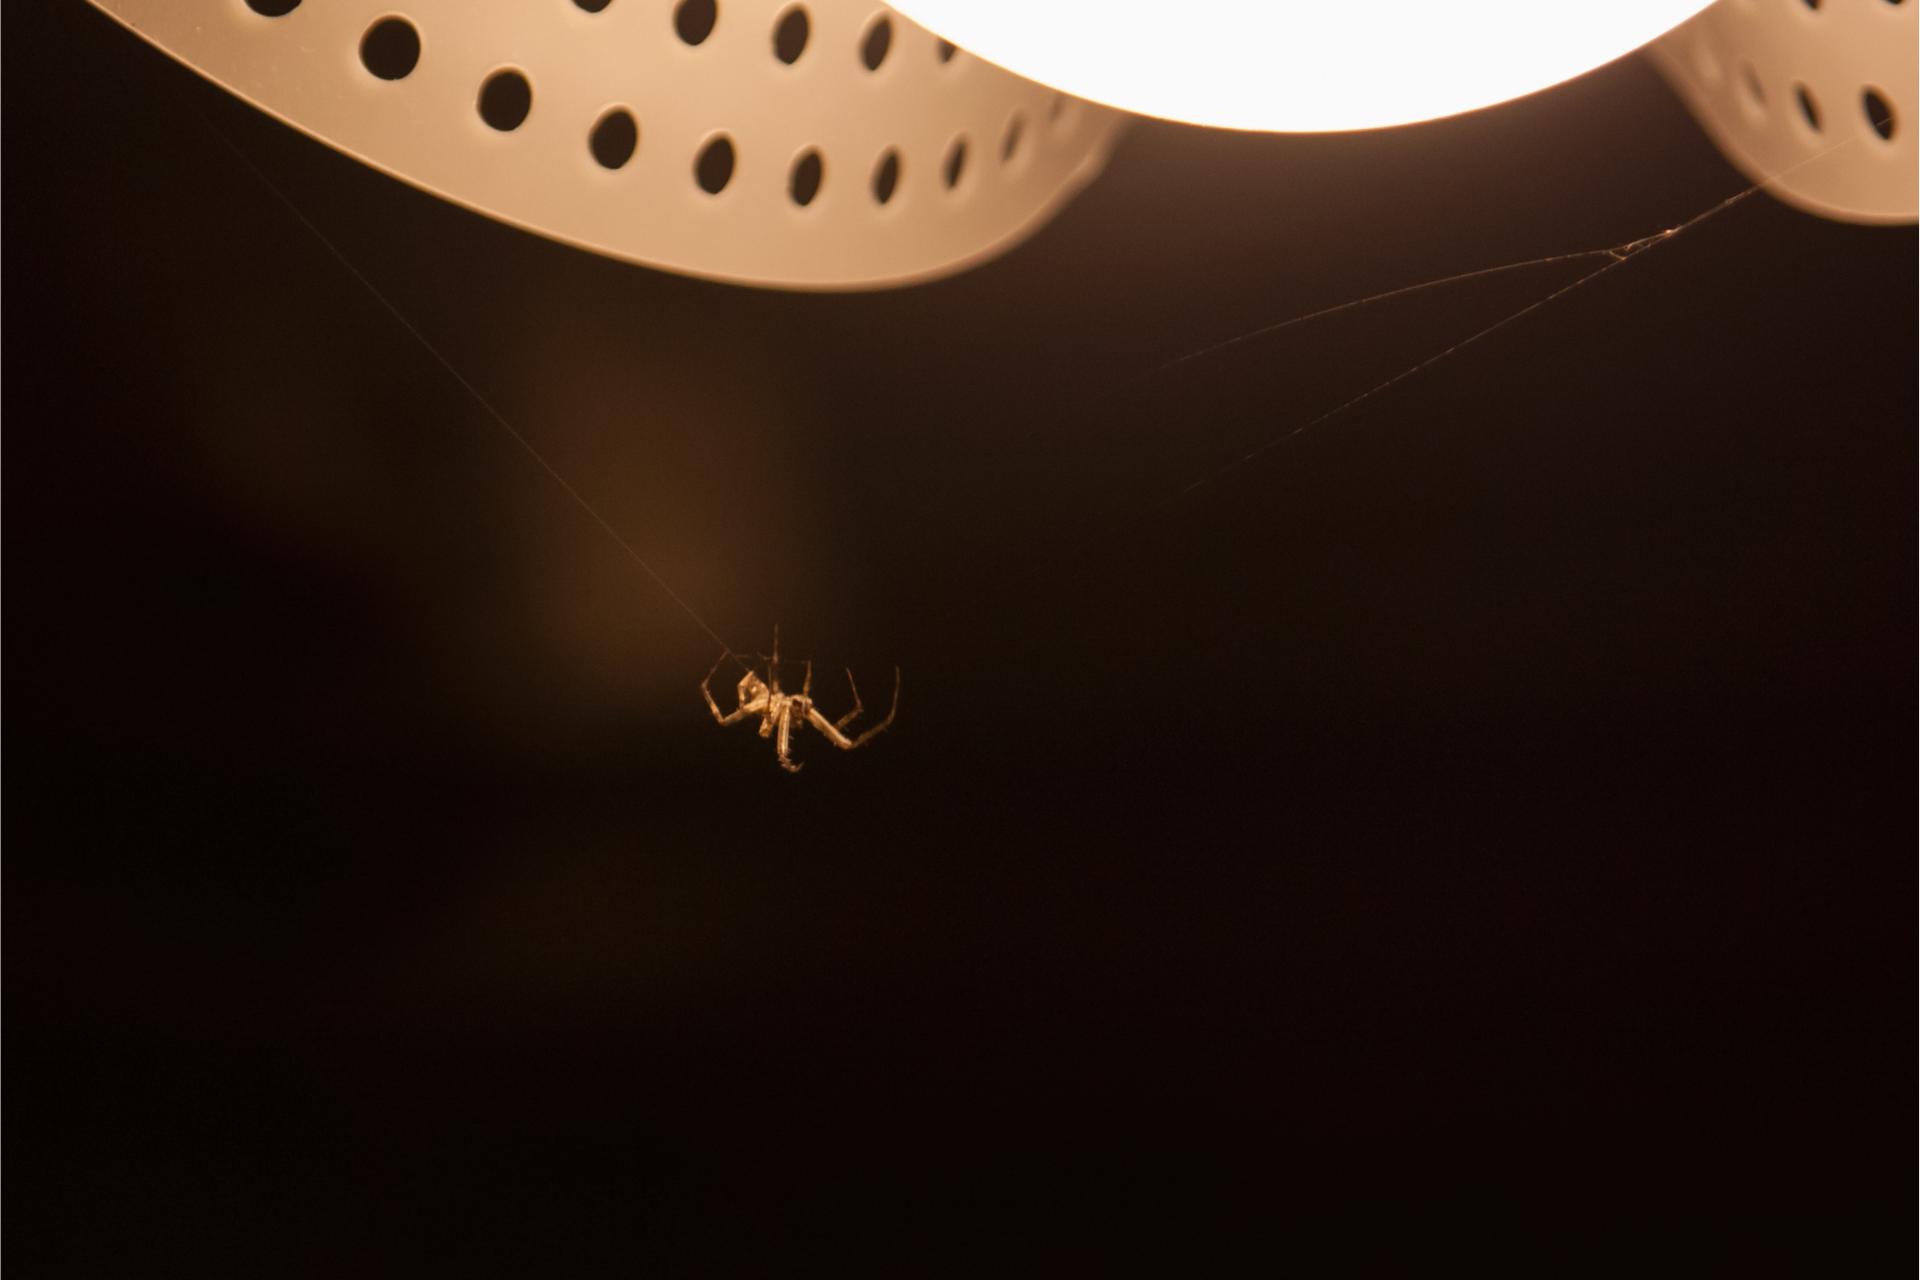 A spider is hanging from a light fixture in a dark room.